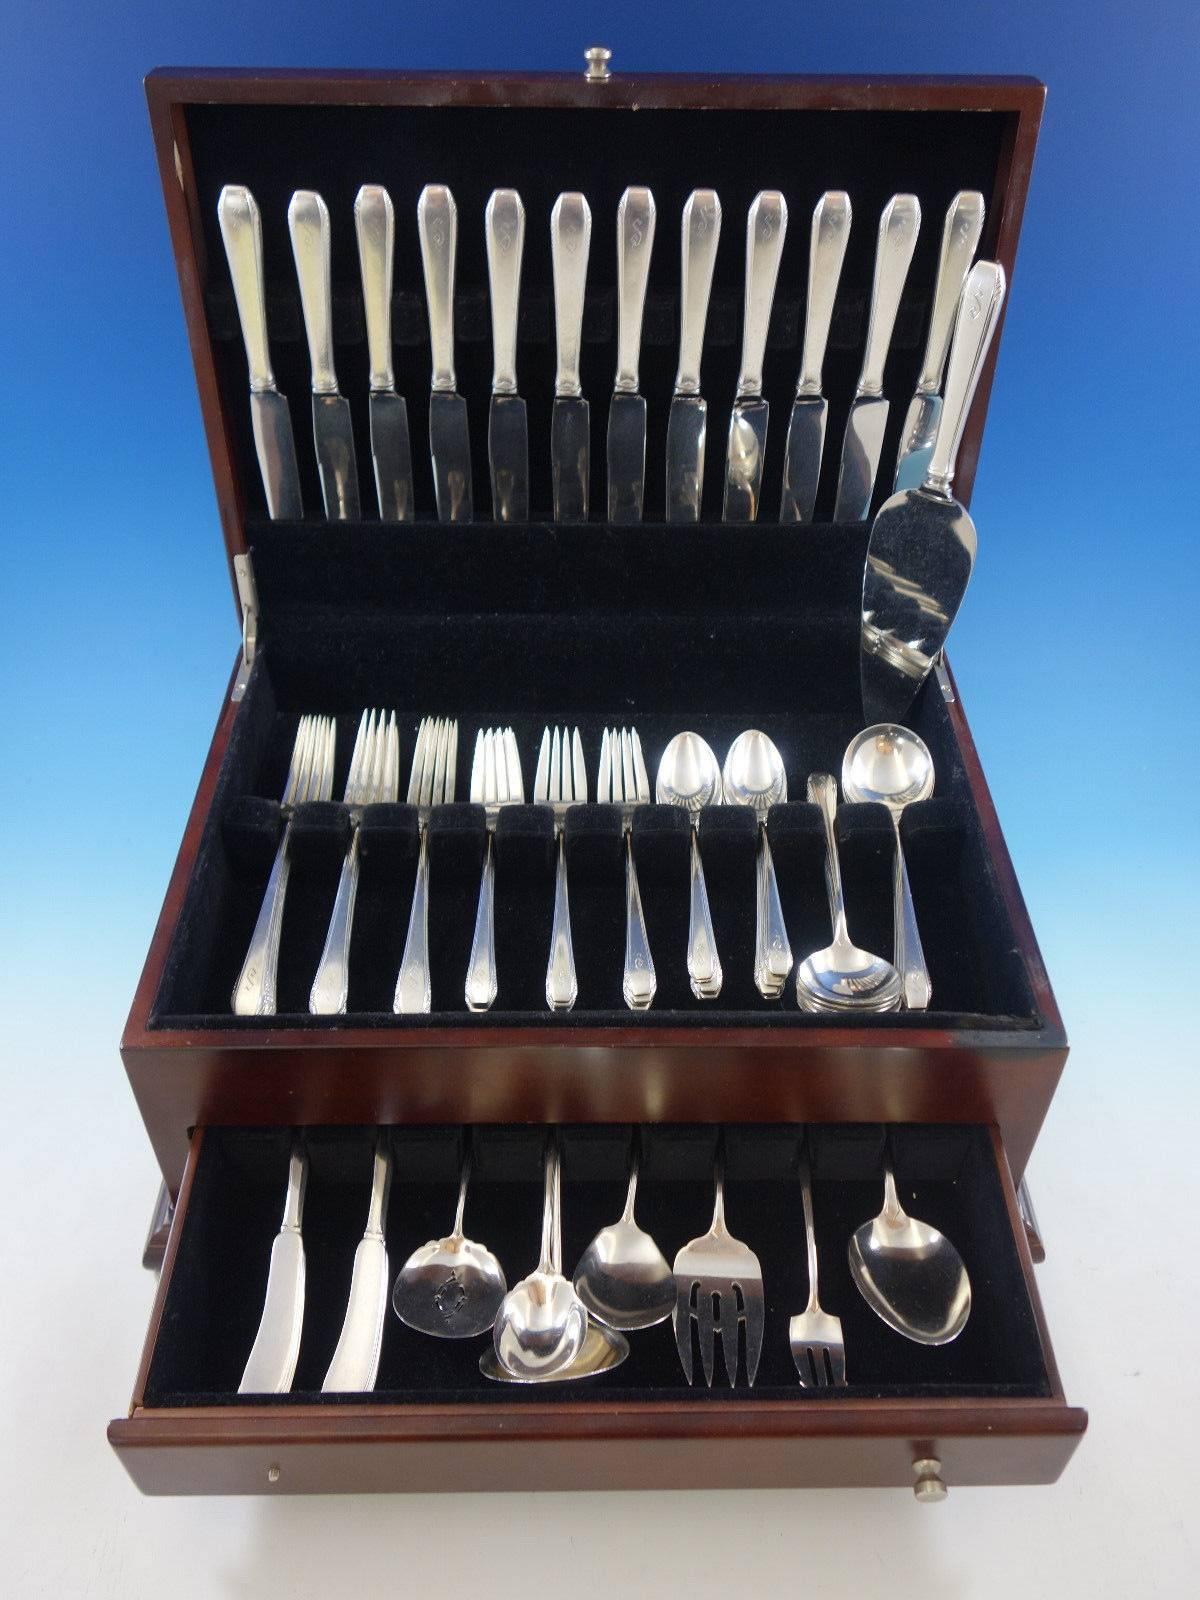 Cascade by Towle sterling silver flatware set of 80 pieces. This set includes: 

12 knives, 8 3/4